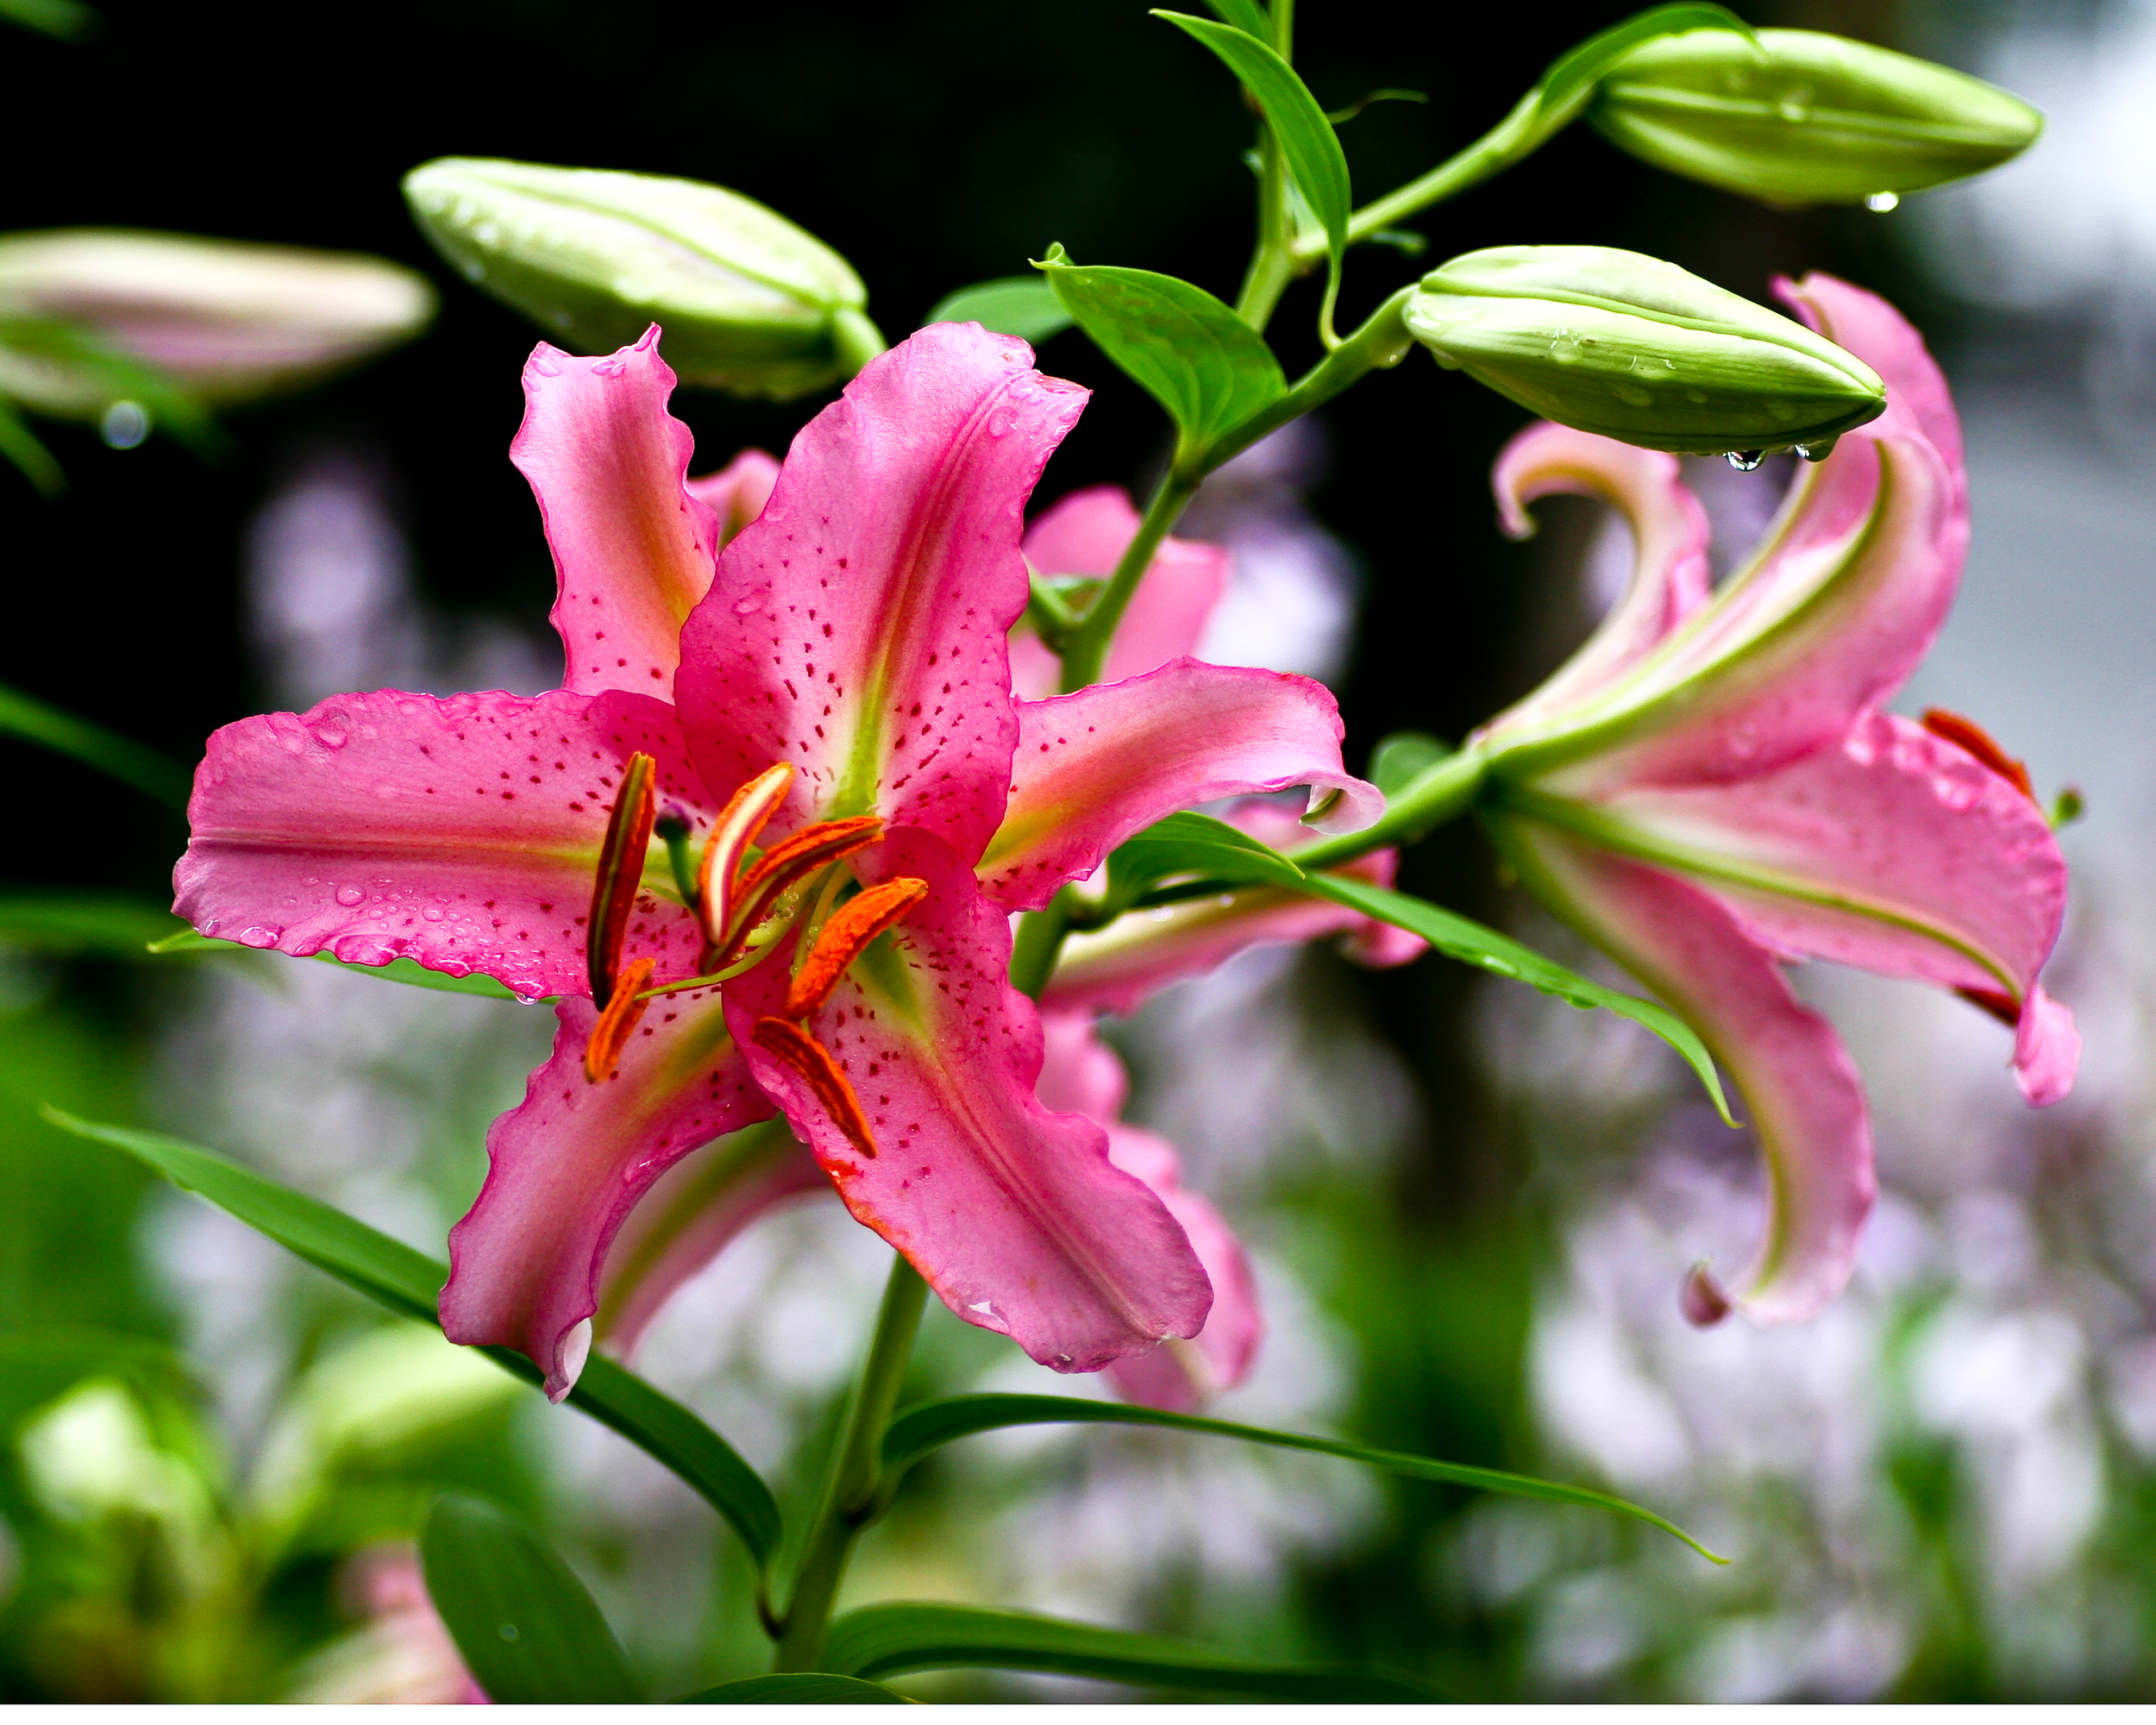 Lily with Morning Dew, Edgartown, MA